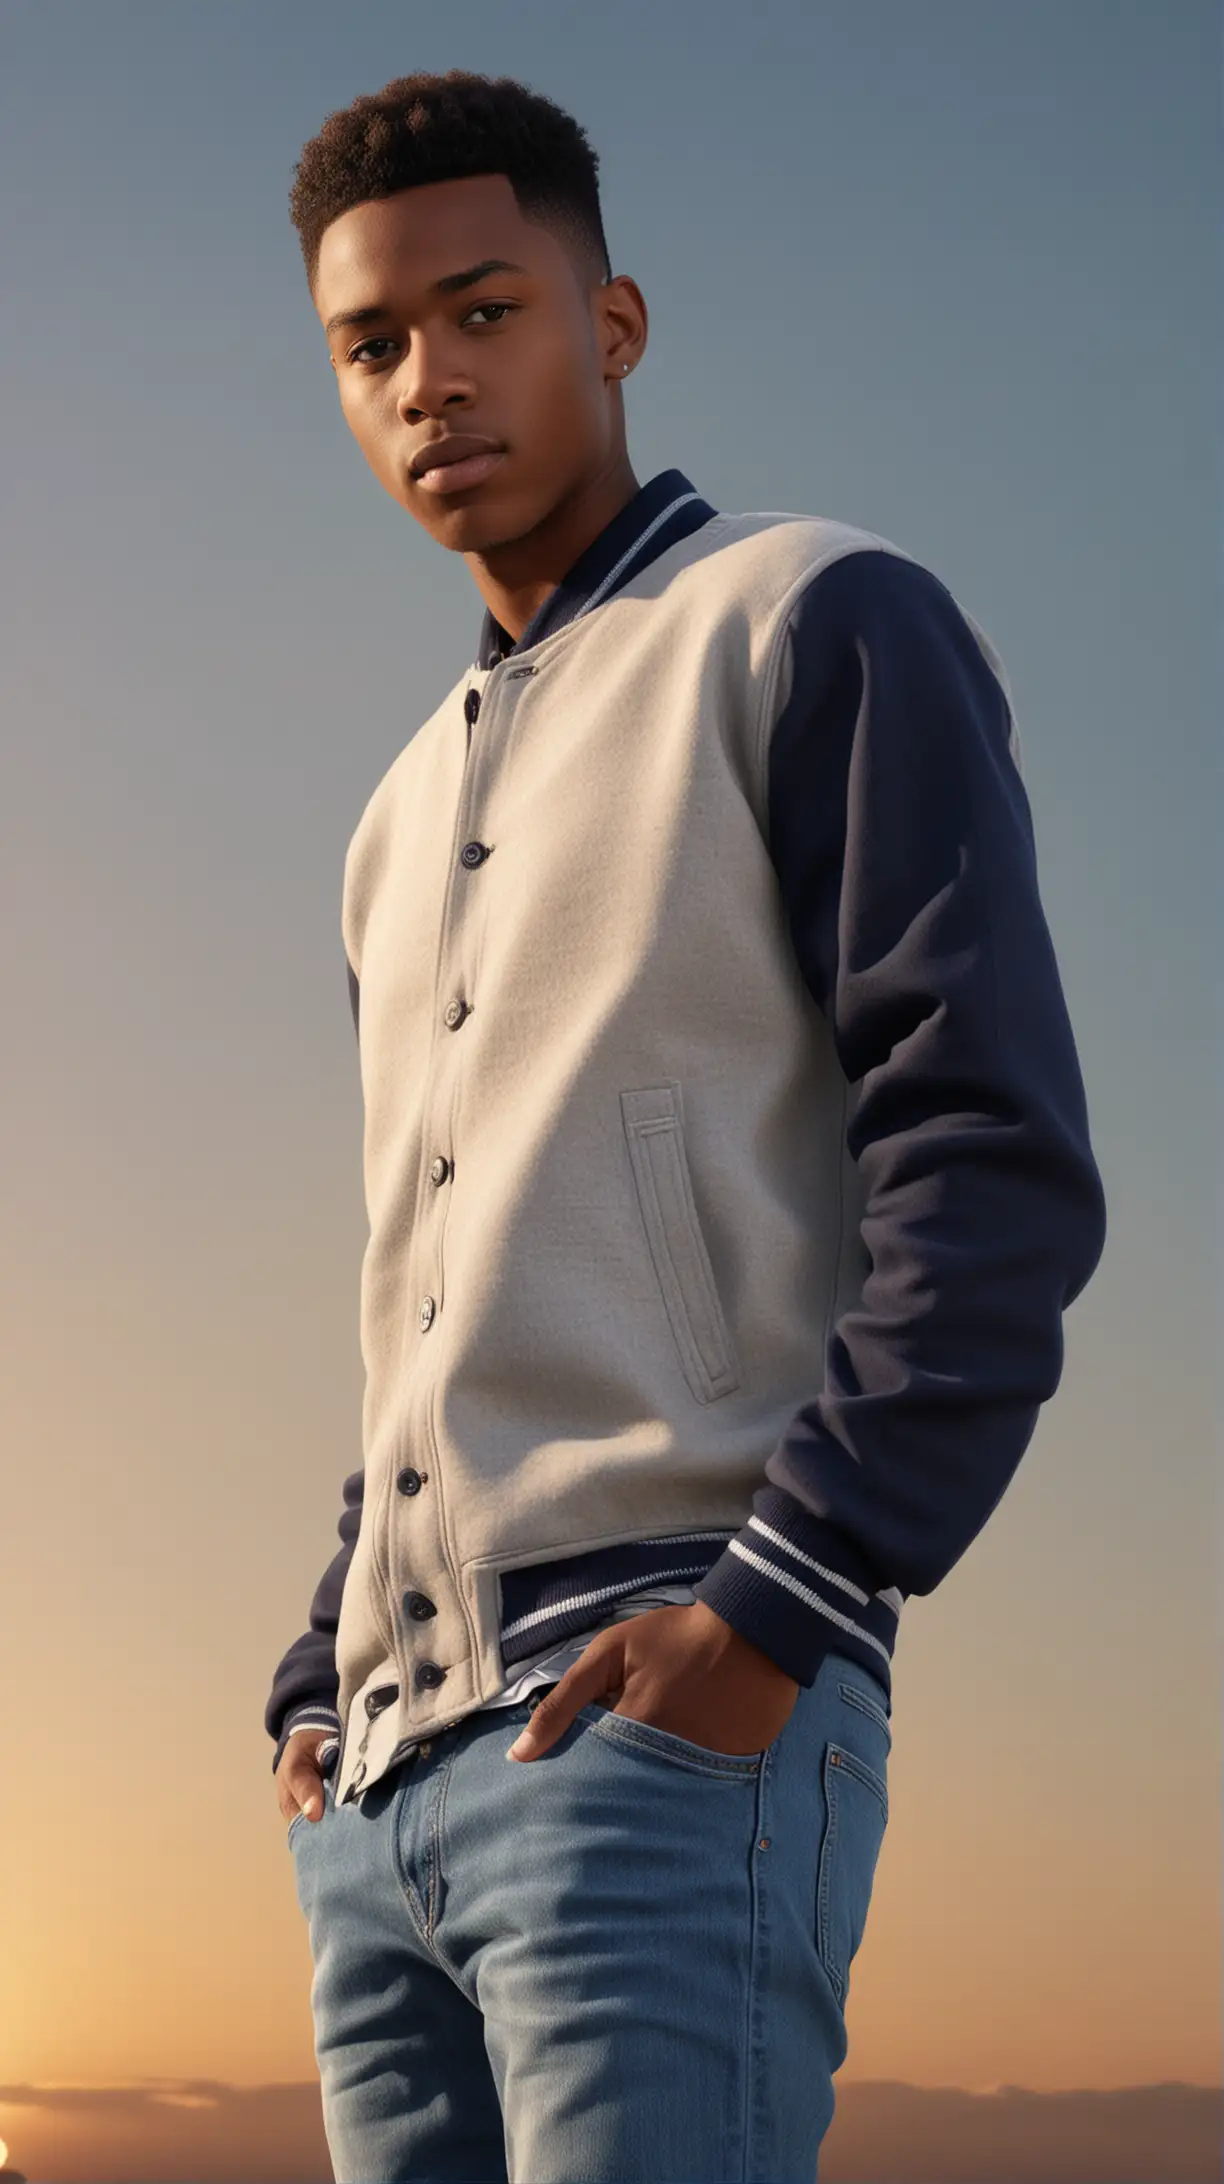 Attractive, young, African male, wearing, a low fade hairstyle, wearing a light grey, meltn wool baseball jacket with Navy Blue sleeves, wearing blue jeans, looking past the camera, time of day is afternoon, the sky is bright, lighting is Volumetric, hyper realistic detail and full 4k resolution.